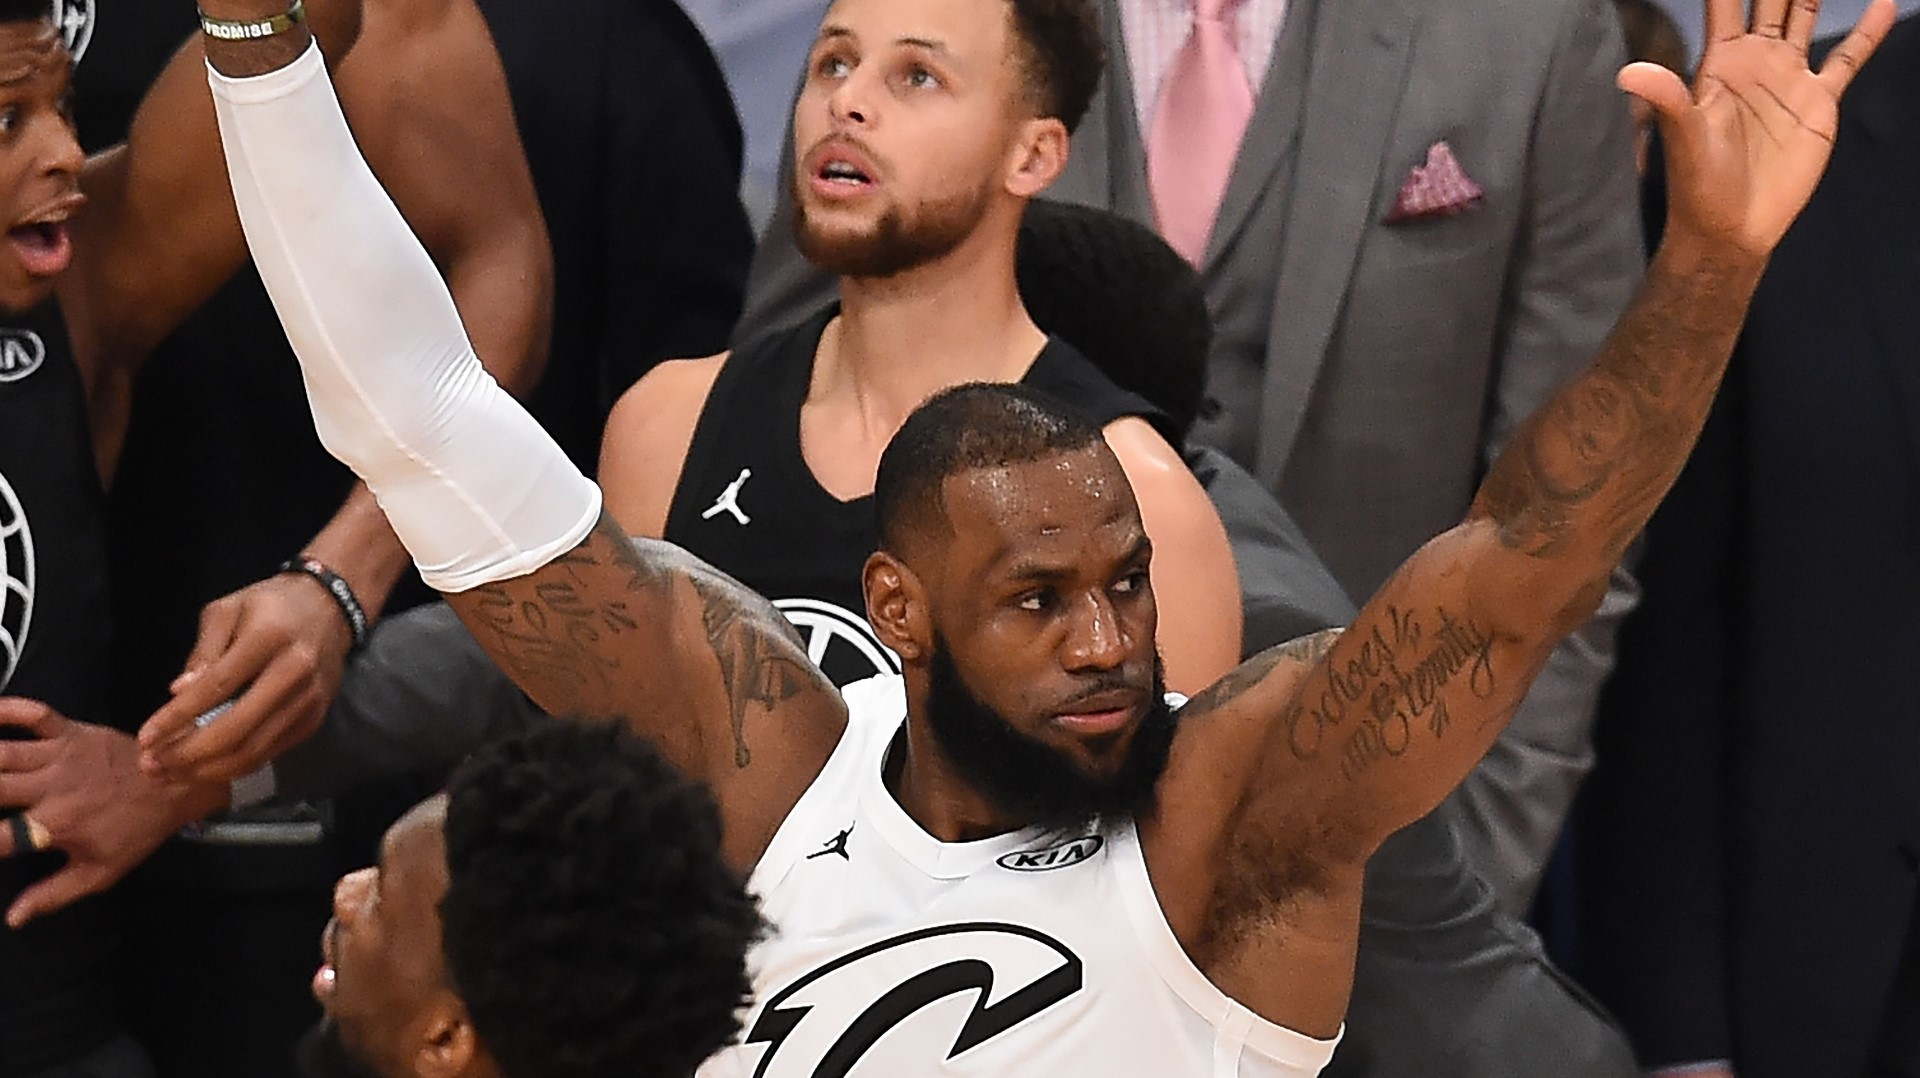 LeBron James stays undefeated in All-Star Game thanks to Steph